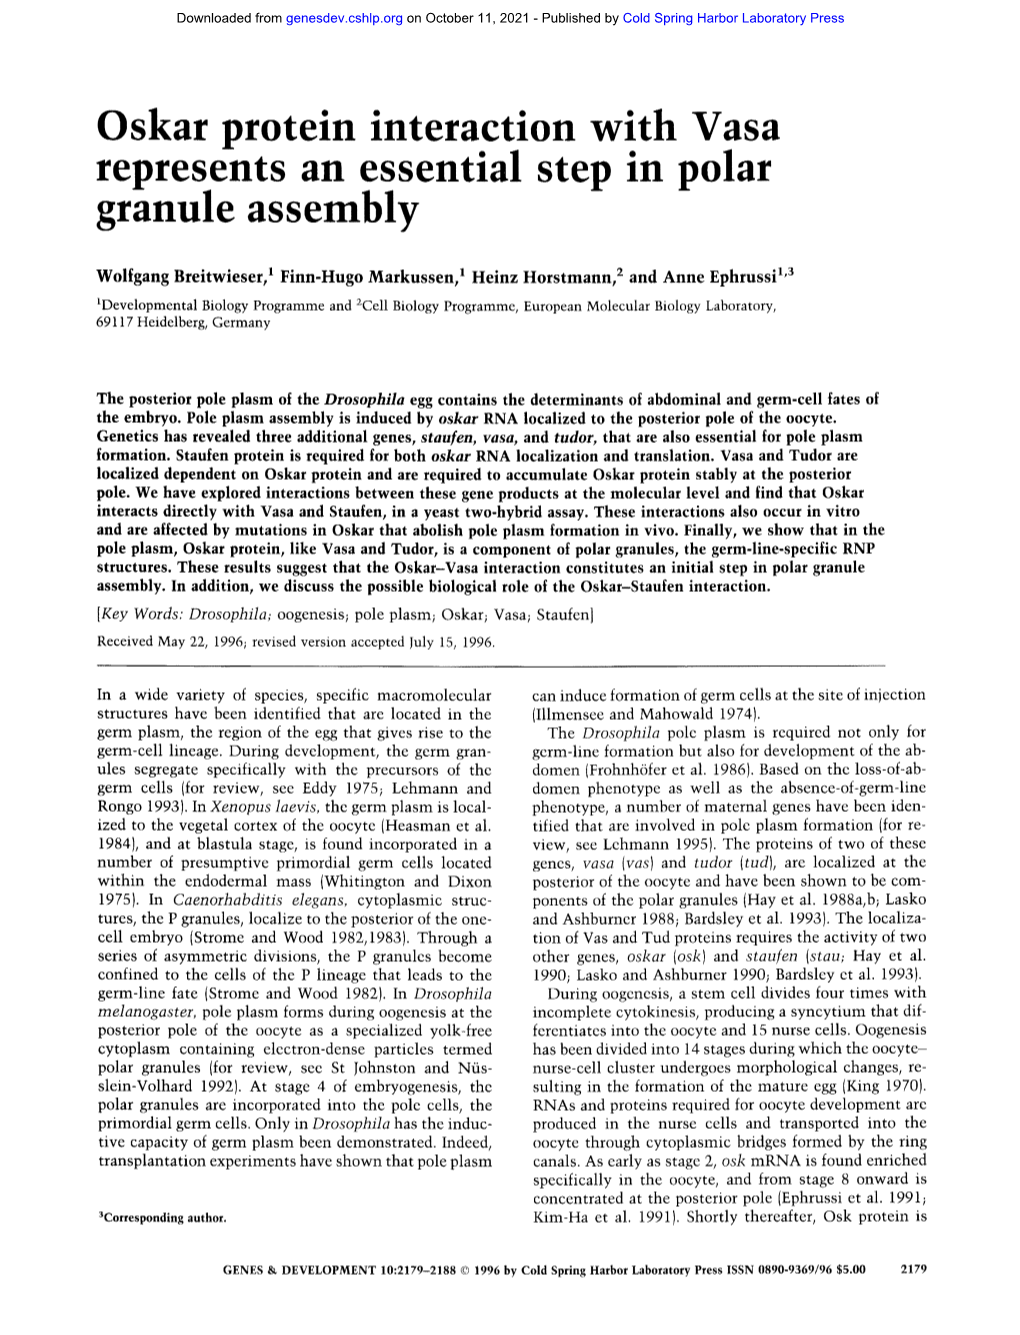 Oskar Protein Interaction with Vasa Represents an Essential Step in Polar Granule Asse Bly